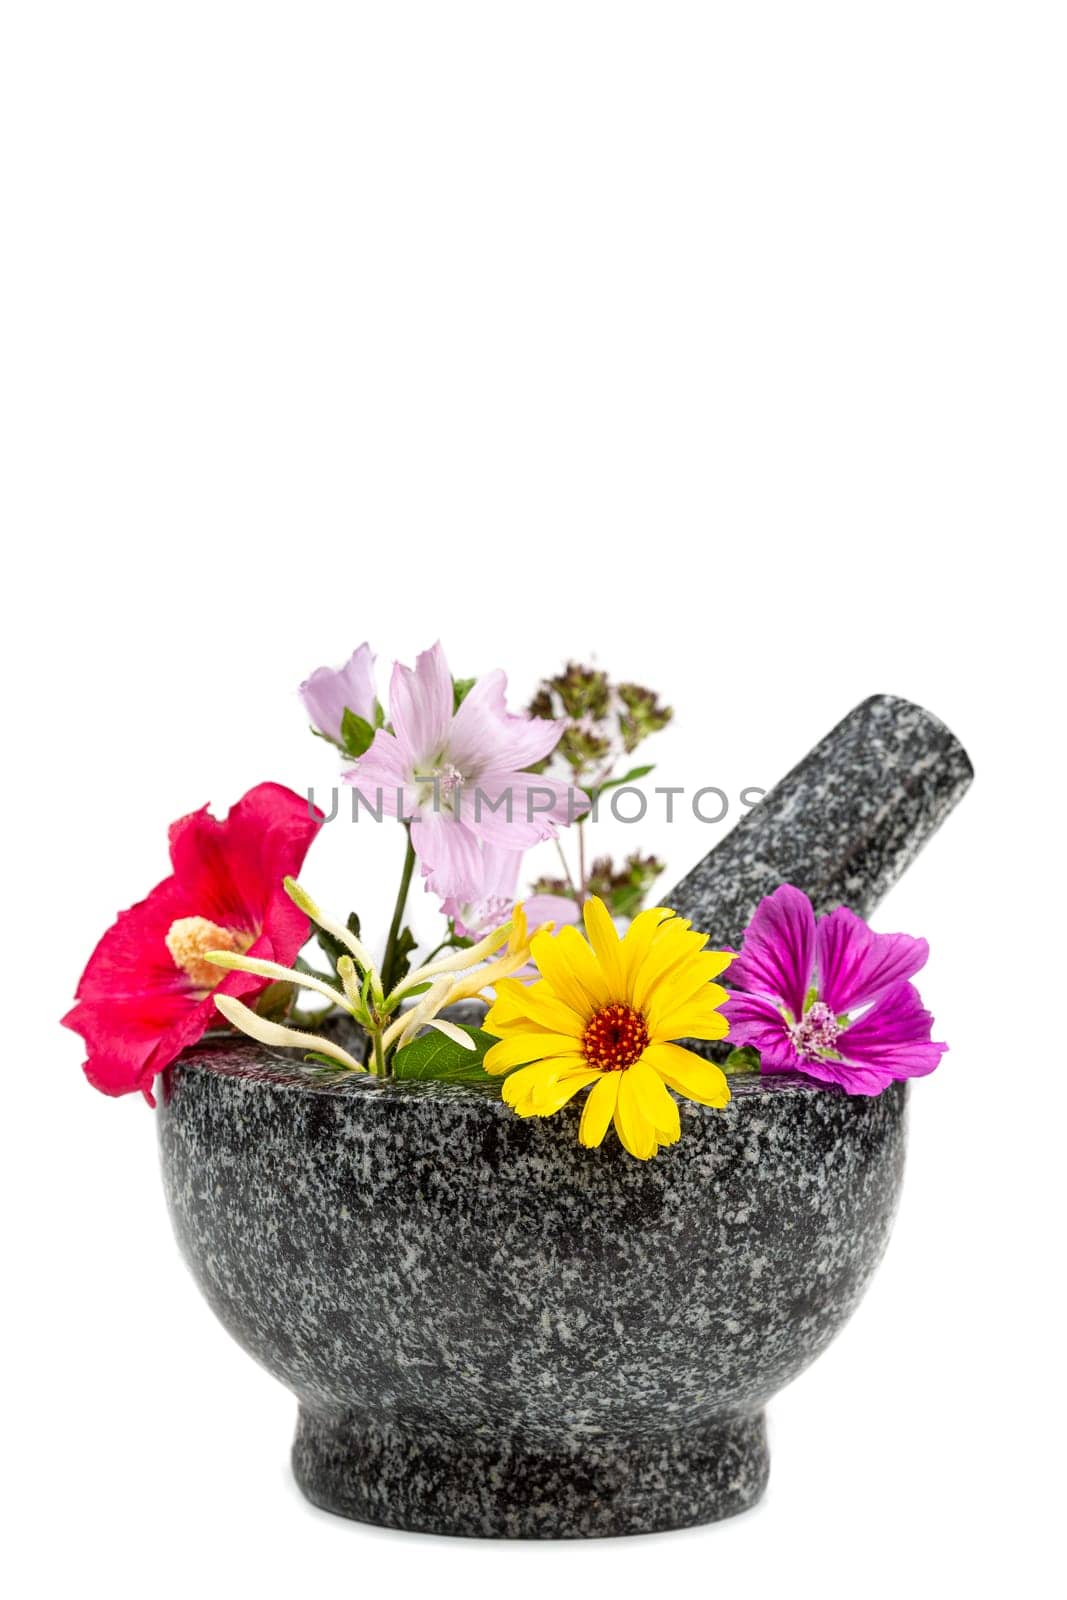 marble mortar with flowers of chamomile, clover, oregano, mignonette, isolated on white background by JPC-PROD